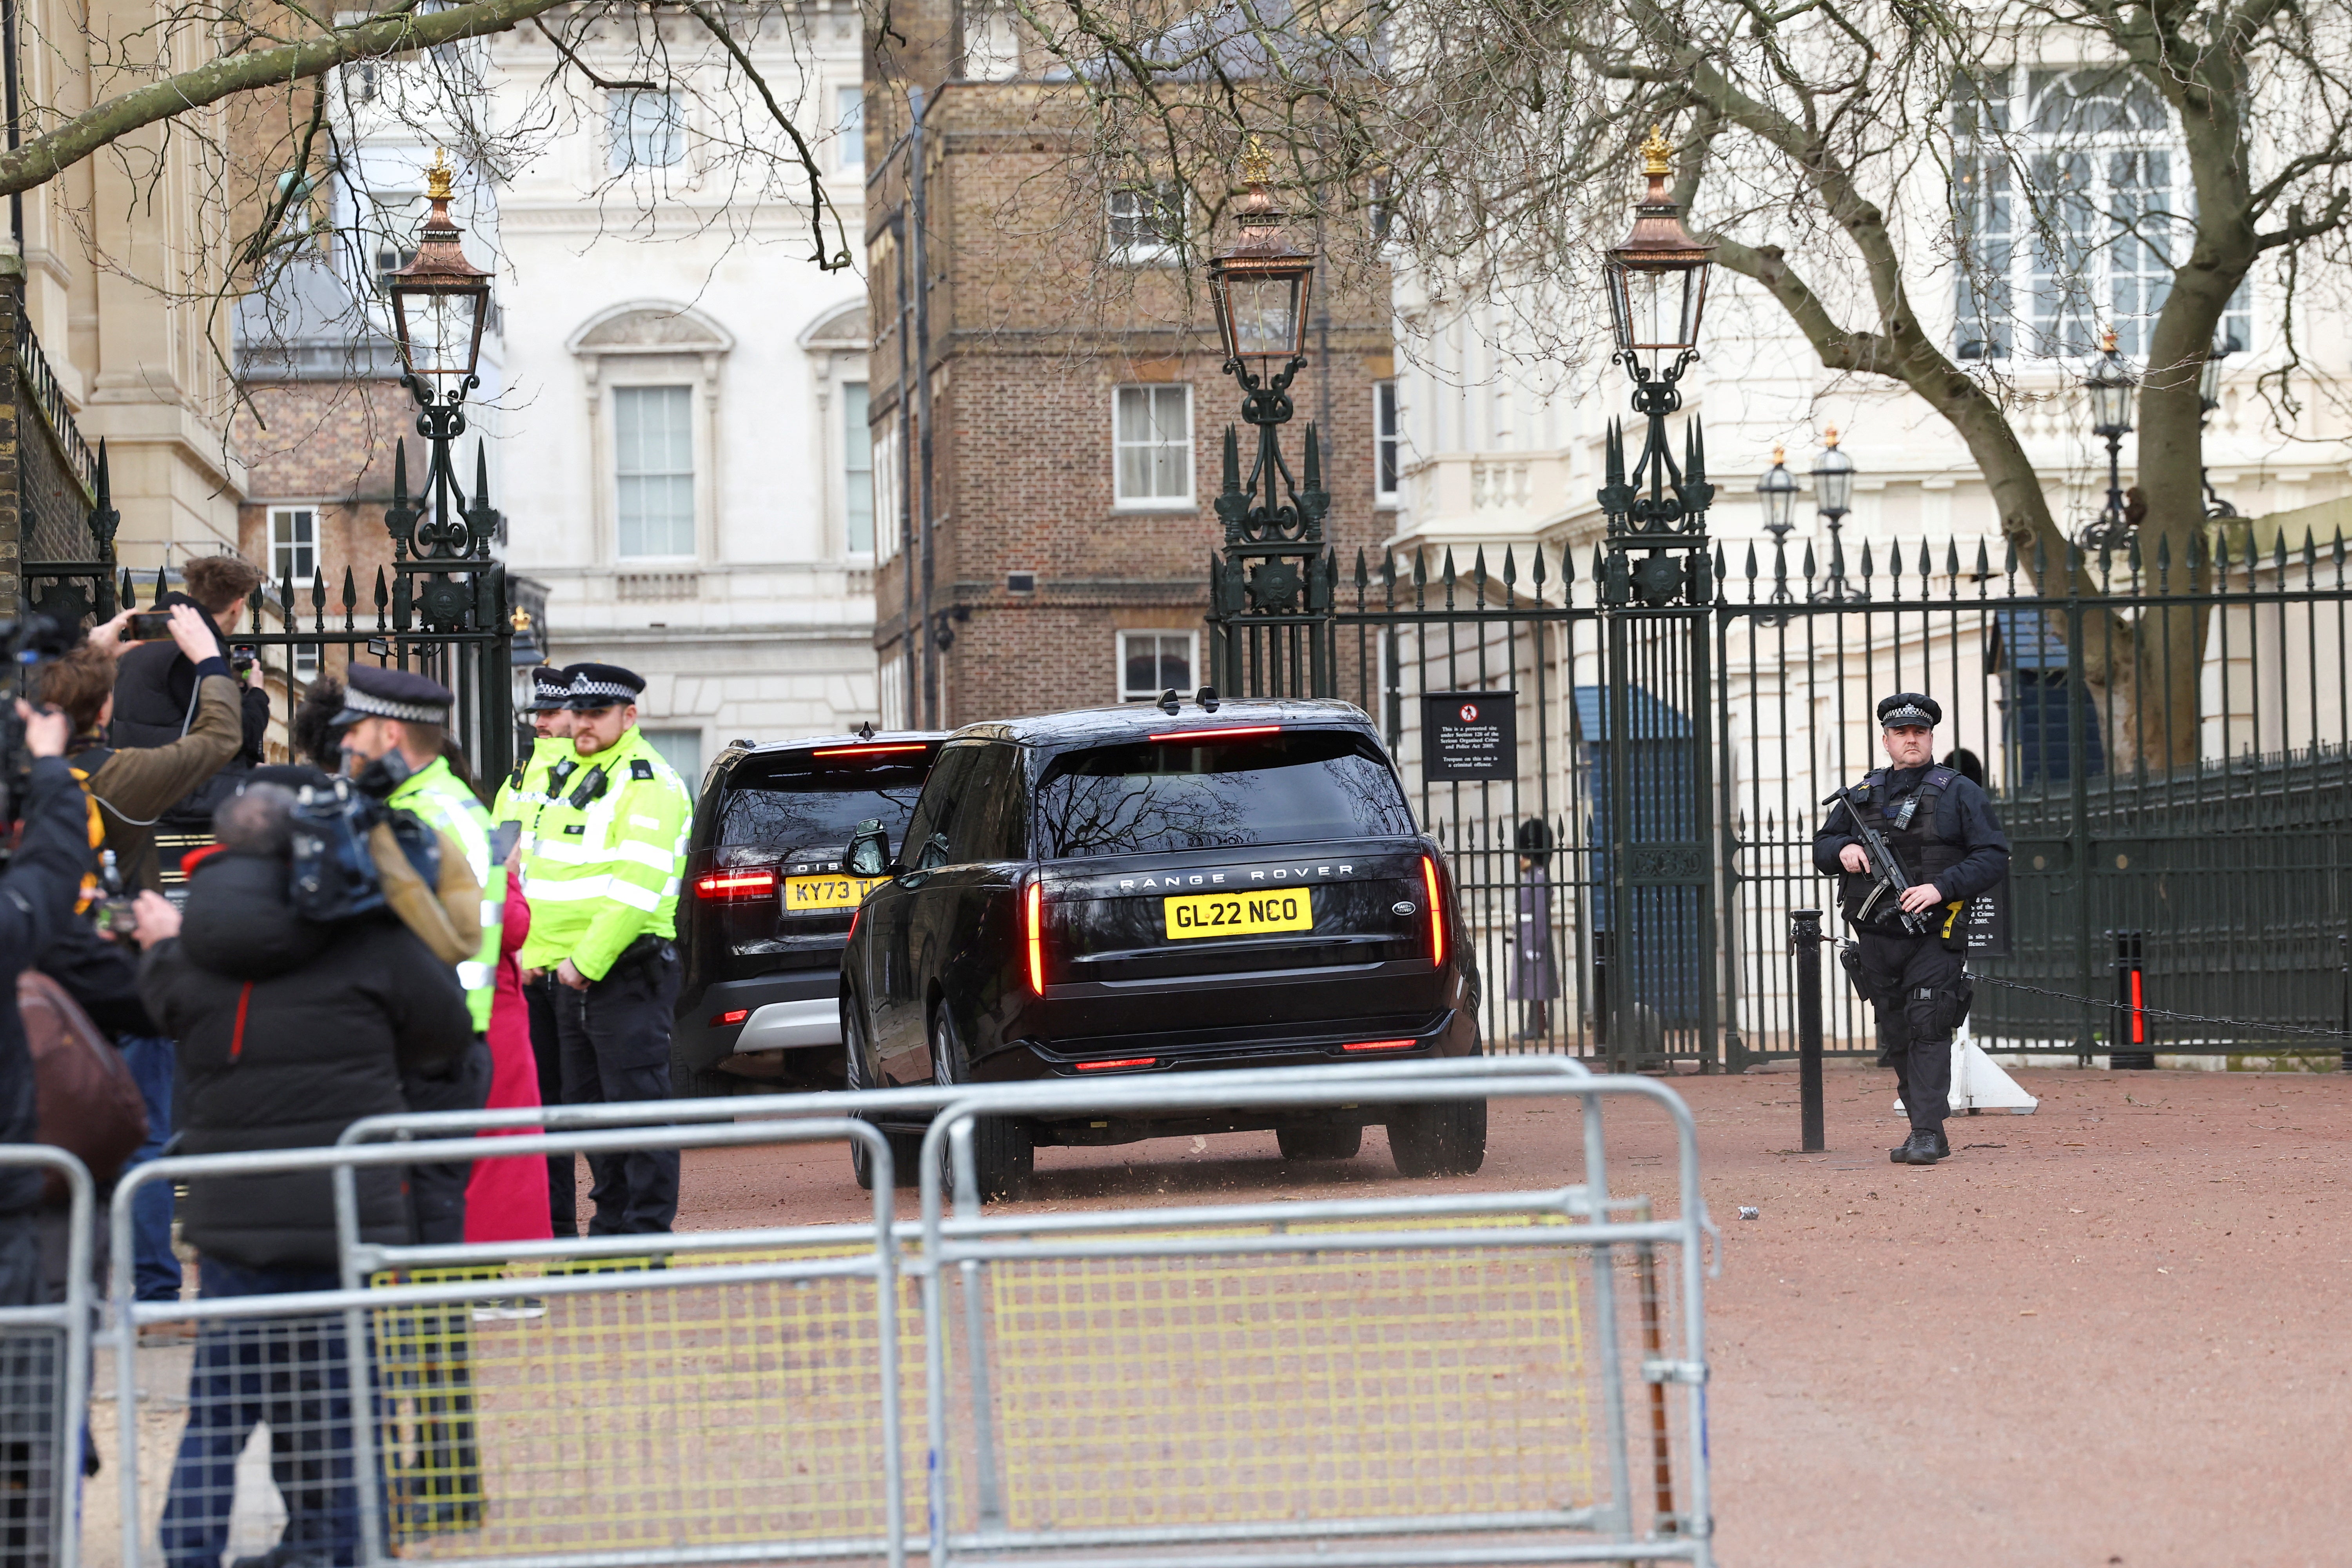 A car believed to be transporting Prince Harry enters Clarence House, the home of King Charles